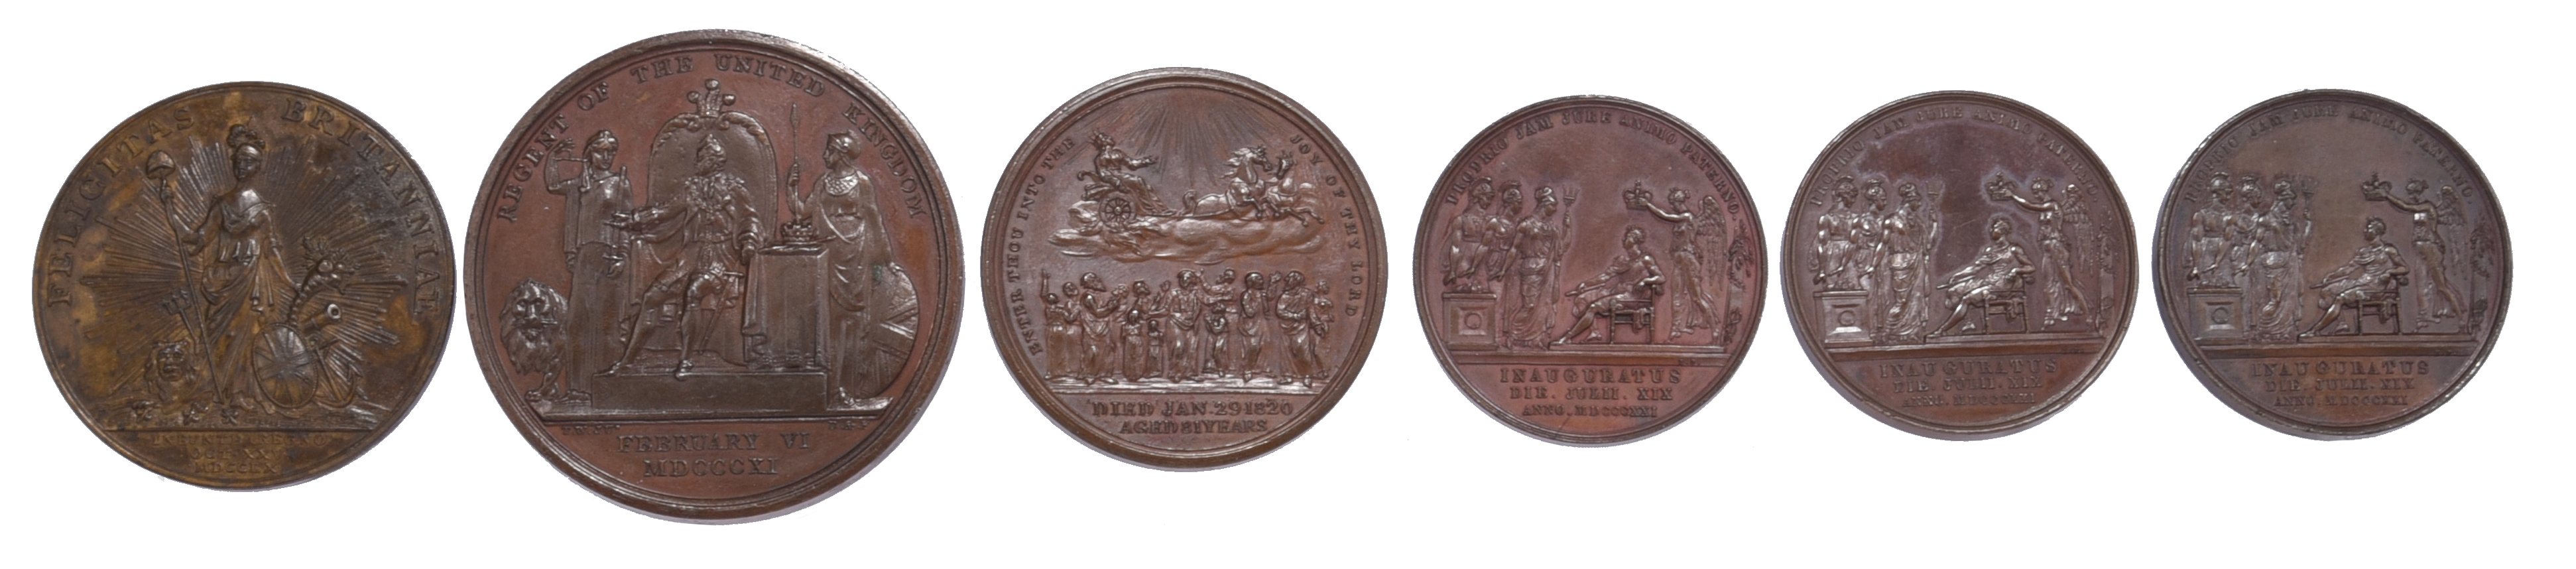 Hanoverian Kings of Britain: six medals, all AE: Accession of George III 1760, 41mm, armoured bust - Image 2 of 2